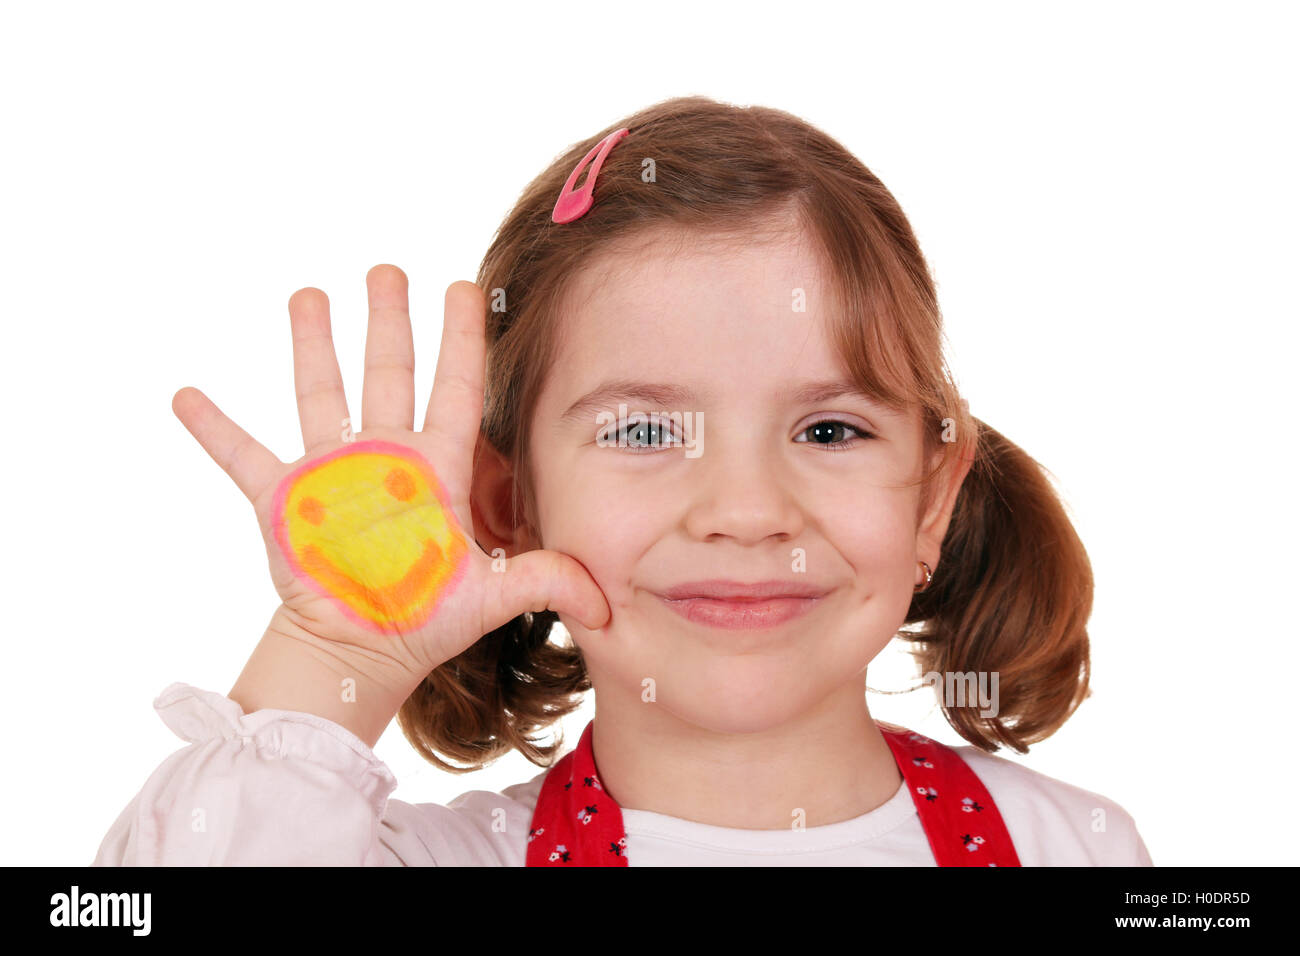 happy little girl with smiley on hand portrait Stock Photo